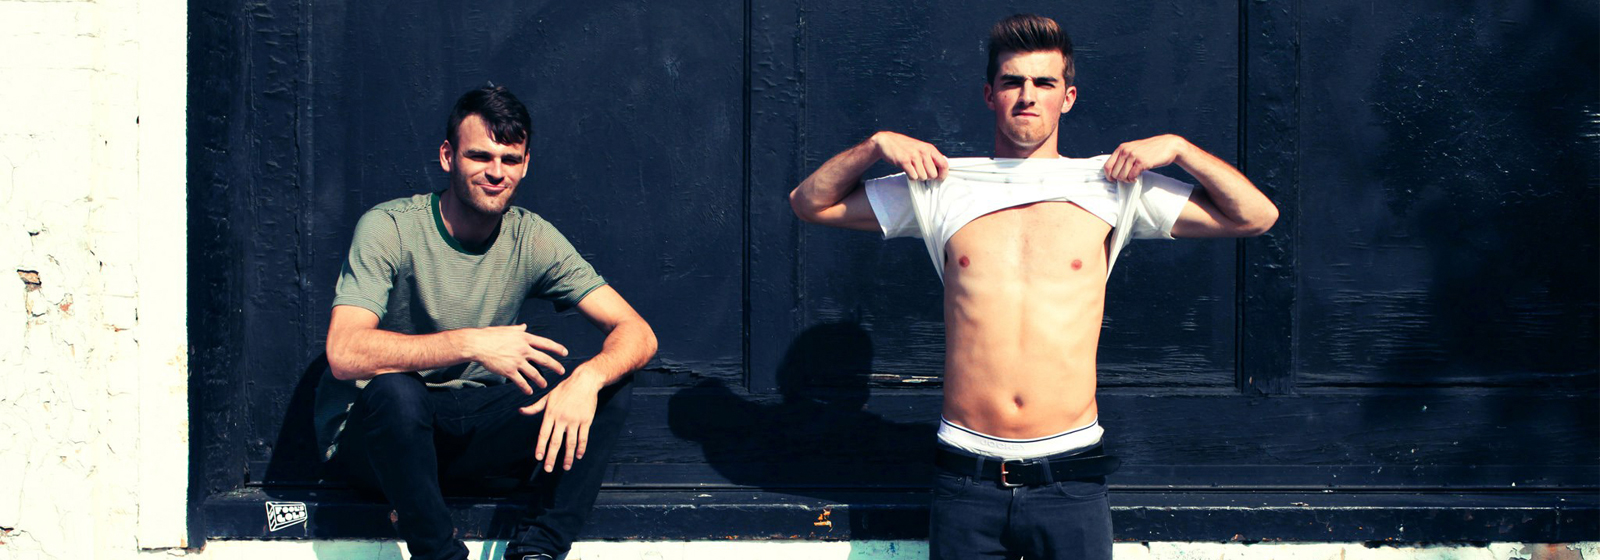 The Chainsmokers’ Life After “ Selfie” And The Artists They Want To Be